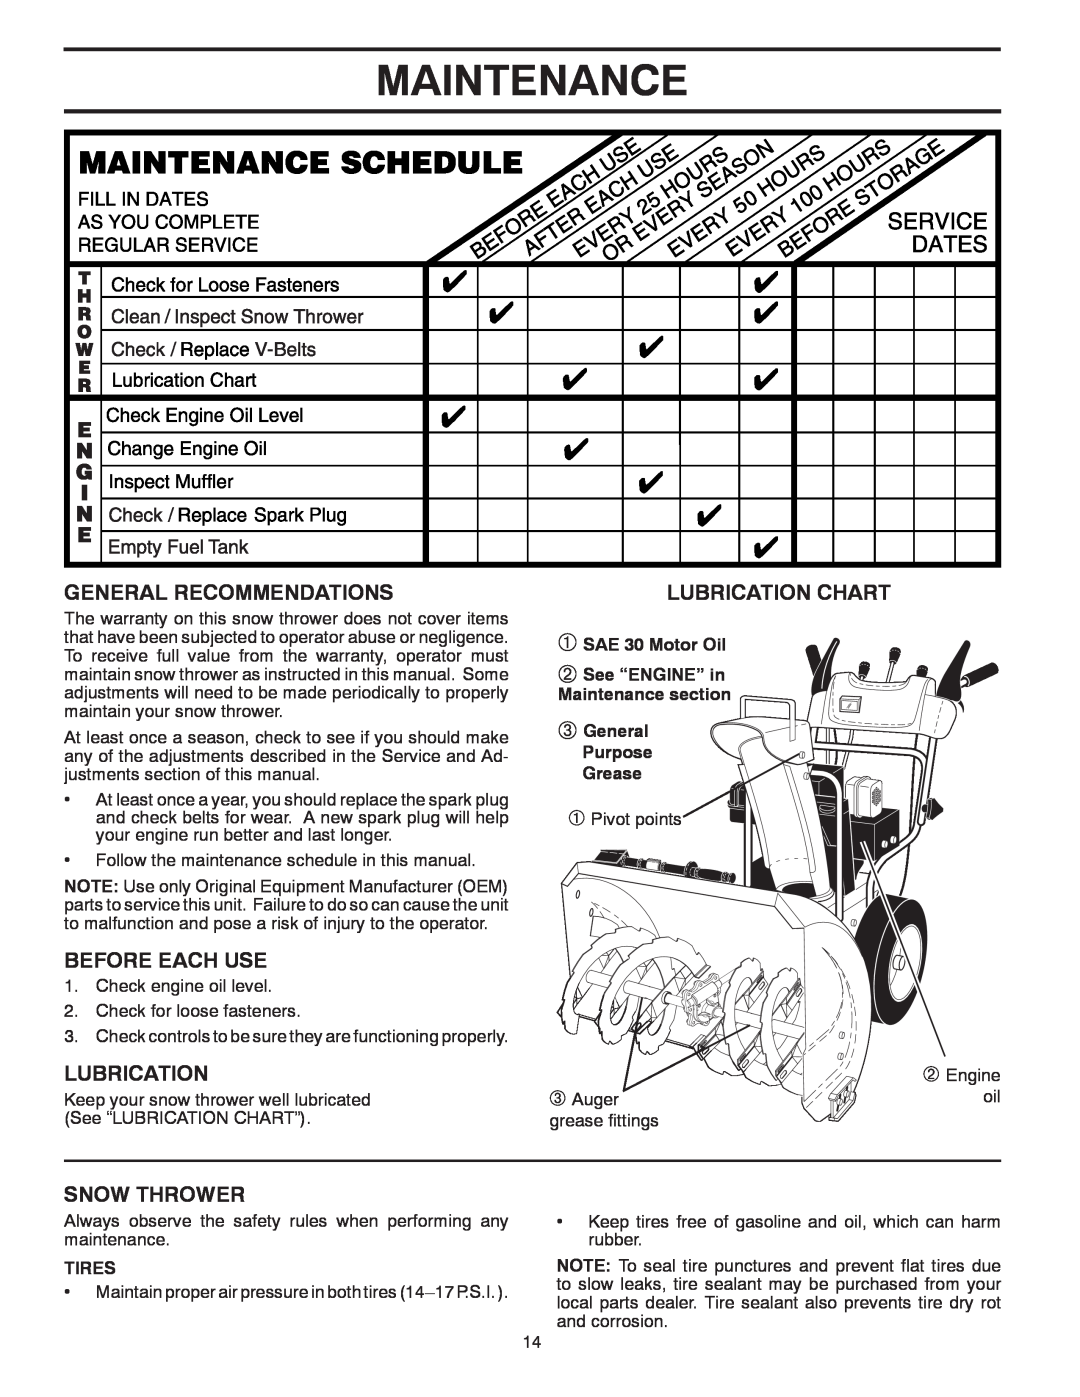 Husqvarna 1830SB manual Maintenance, General Recommendations, Before Each Use, Snow Thrower, Lubrication Chart, Tires 